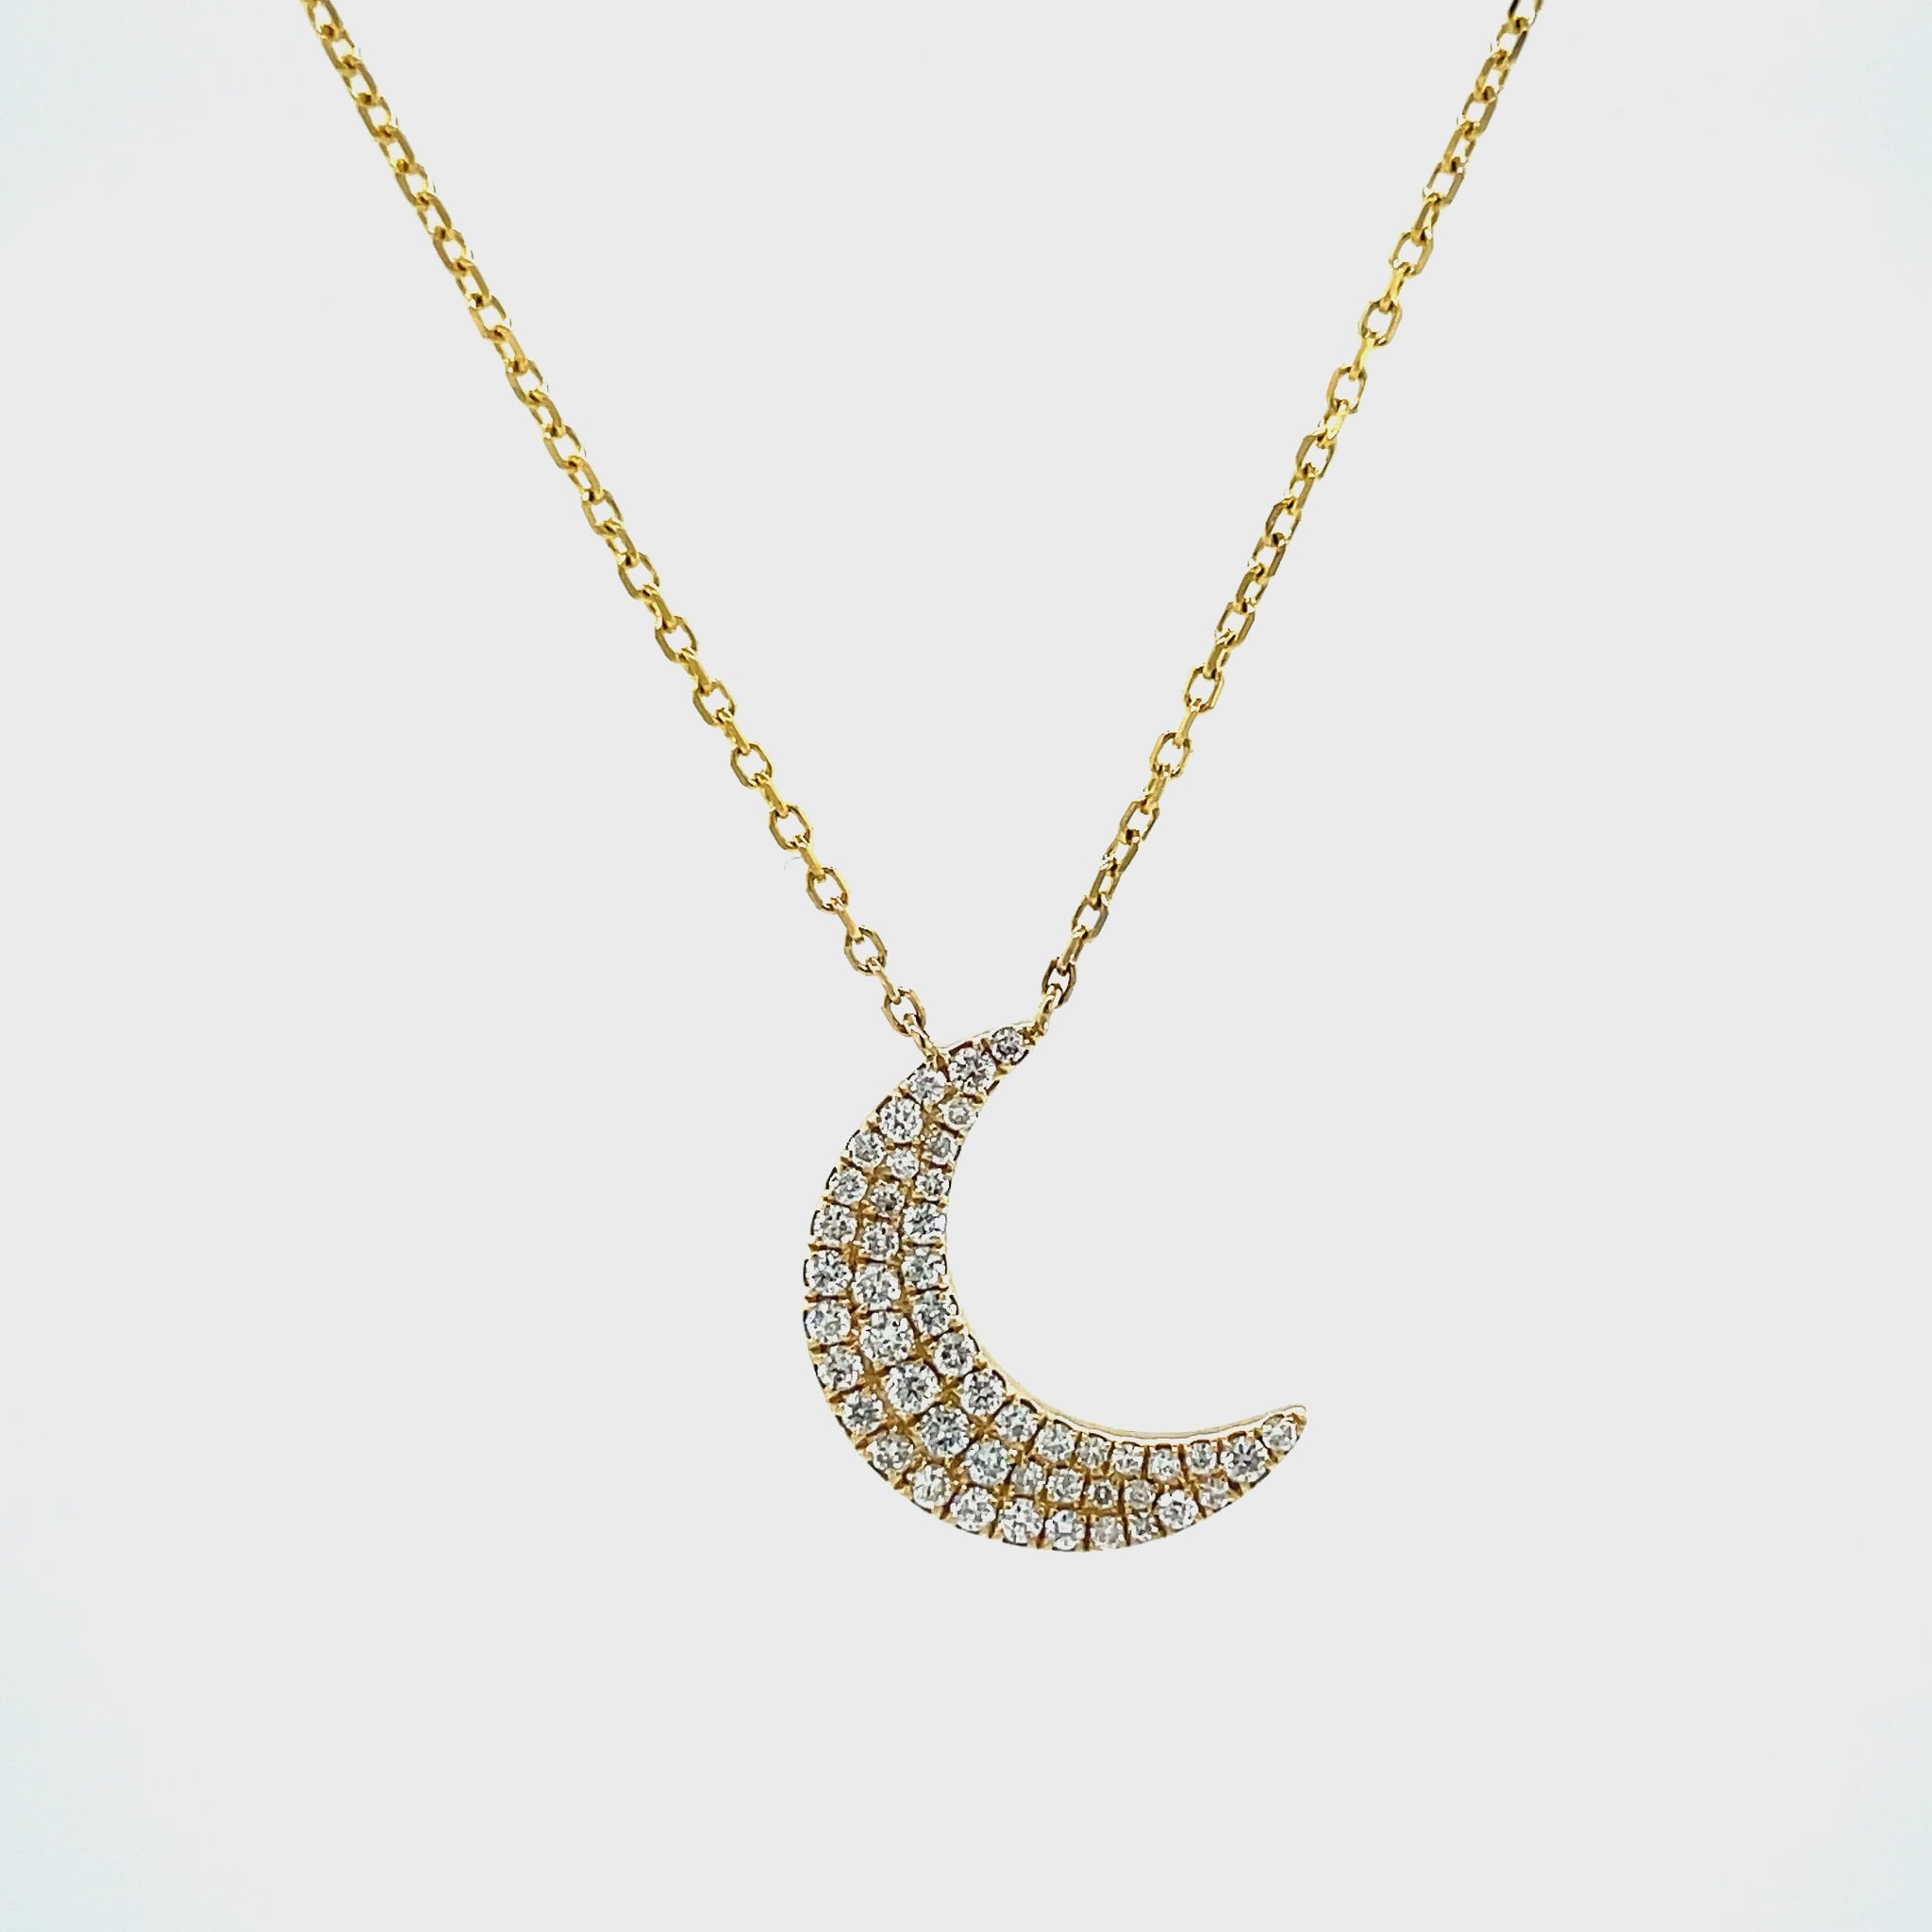 Behold the beauty of this 0.30 cts diamond crescent moon pendant necklace, set in 18K yellow gold. Securely attached to an 18" chain with a sizing loop at 16", this stunning piece will adorn you with elegance and grace.